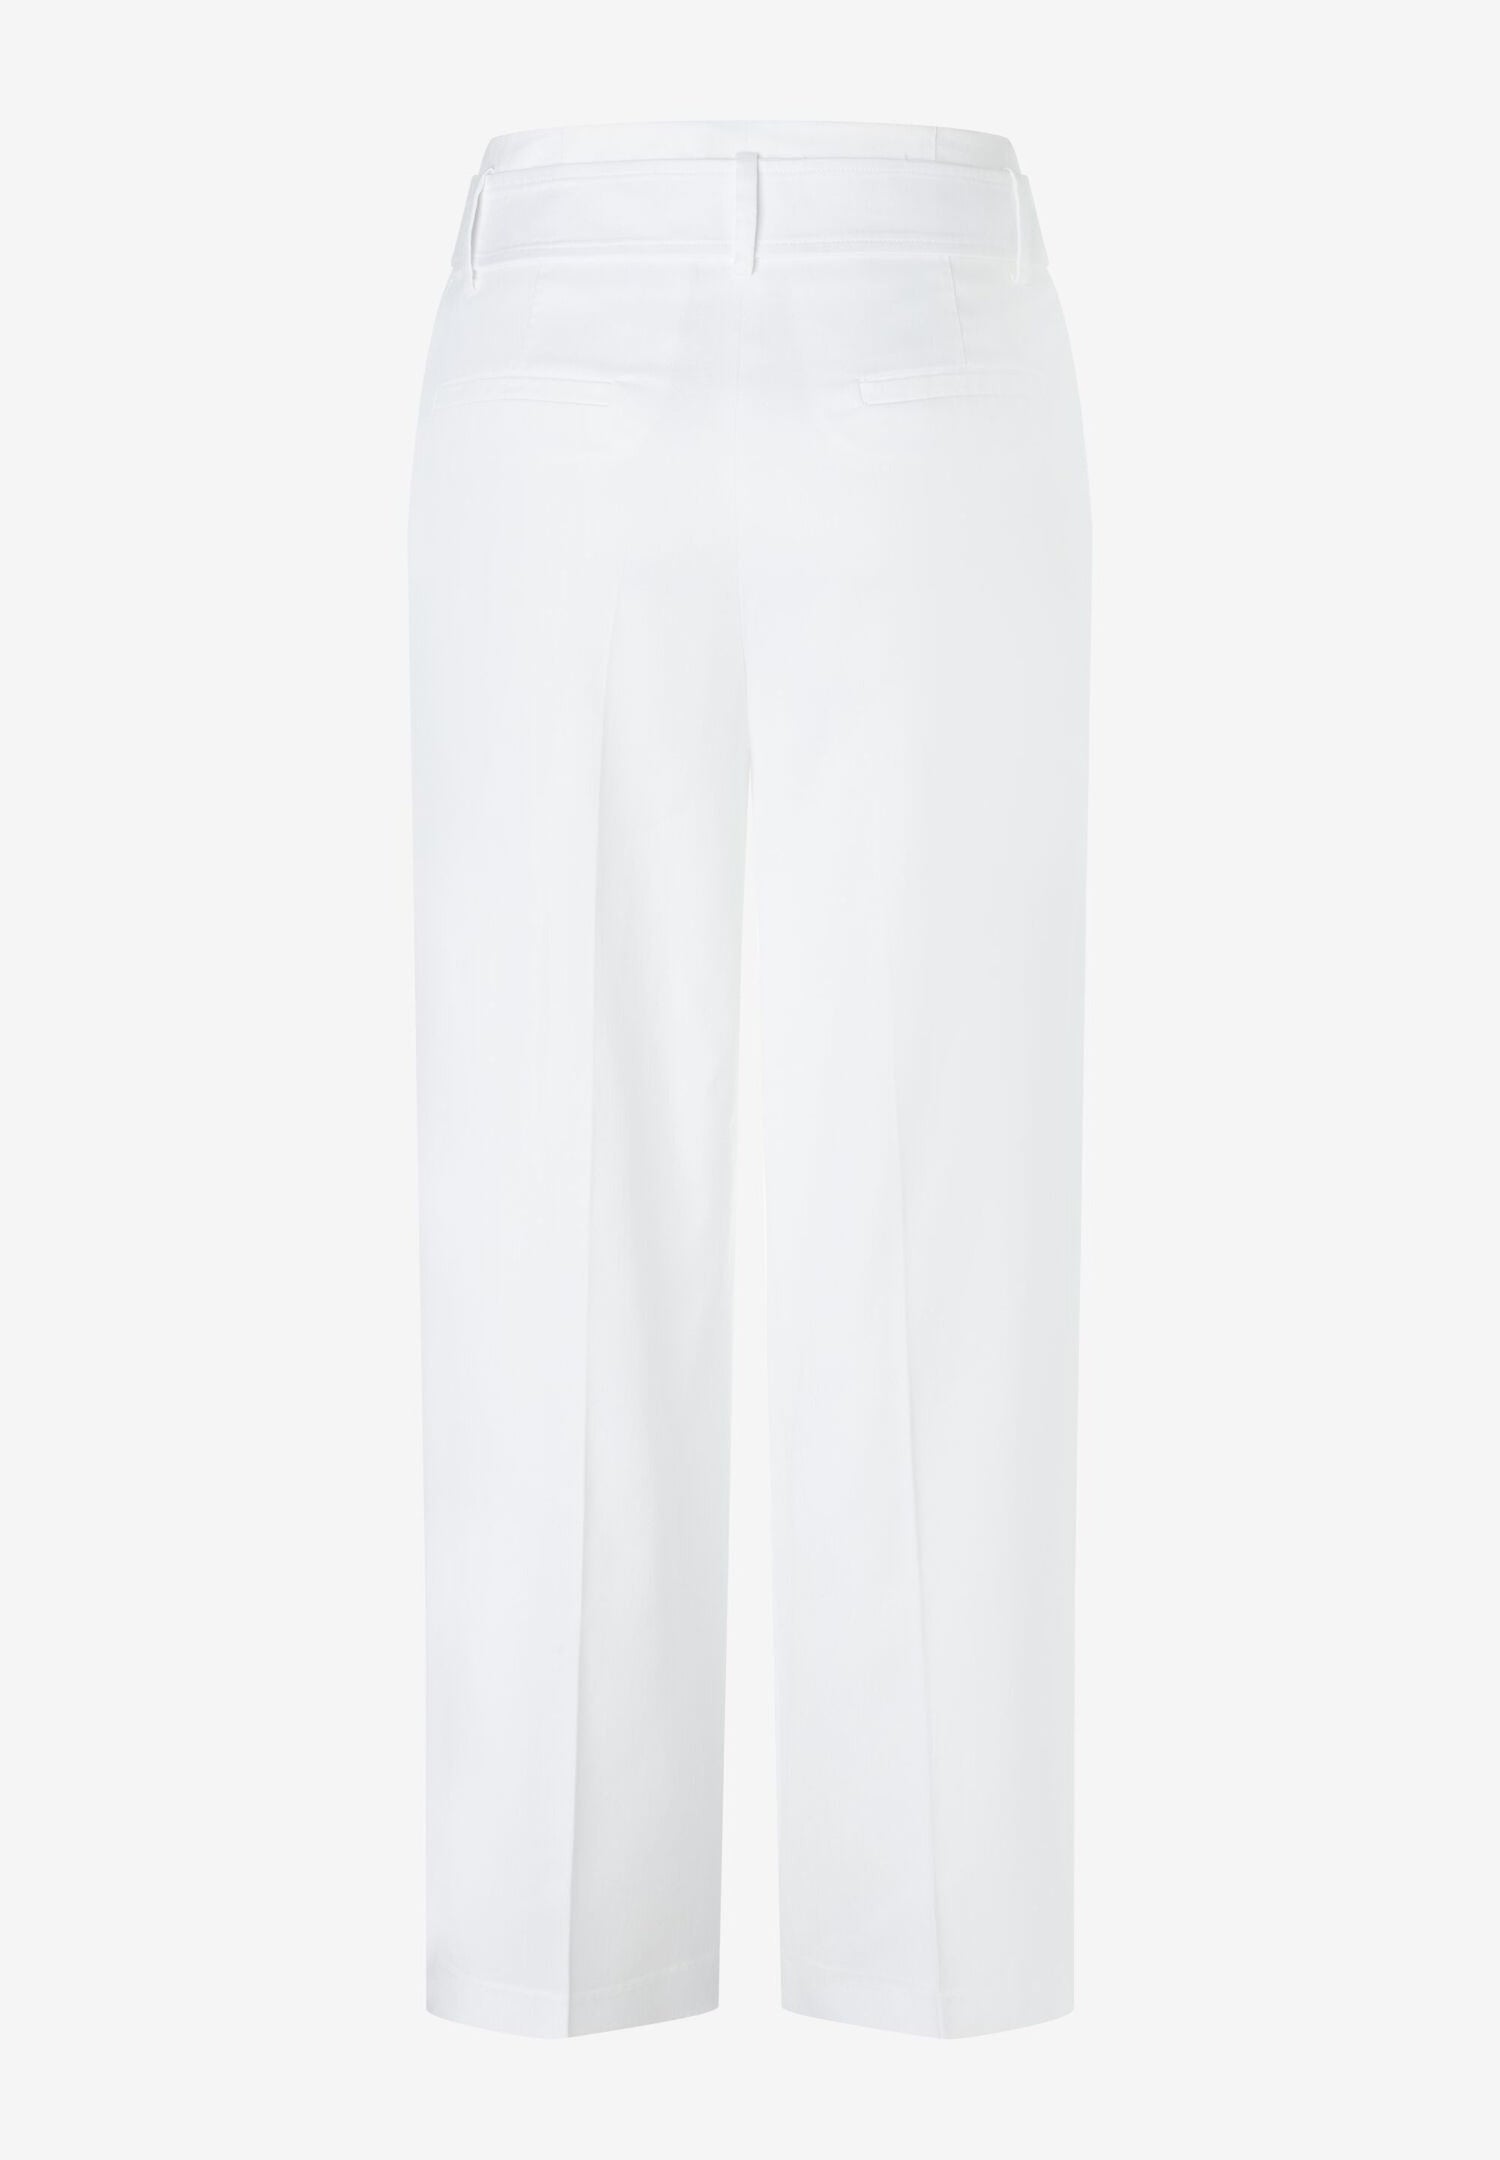 White Cropped Culotte Style Trousers_04